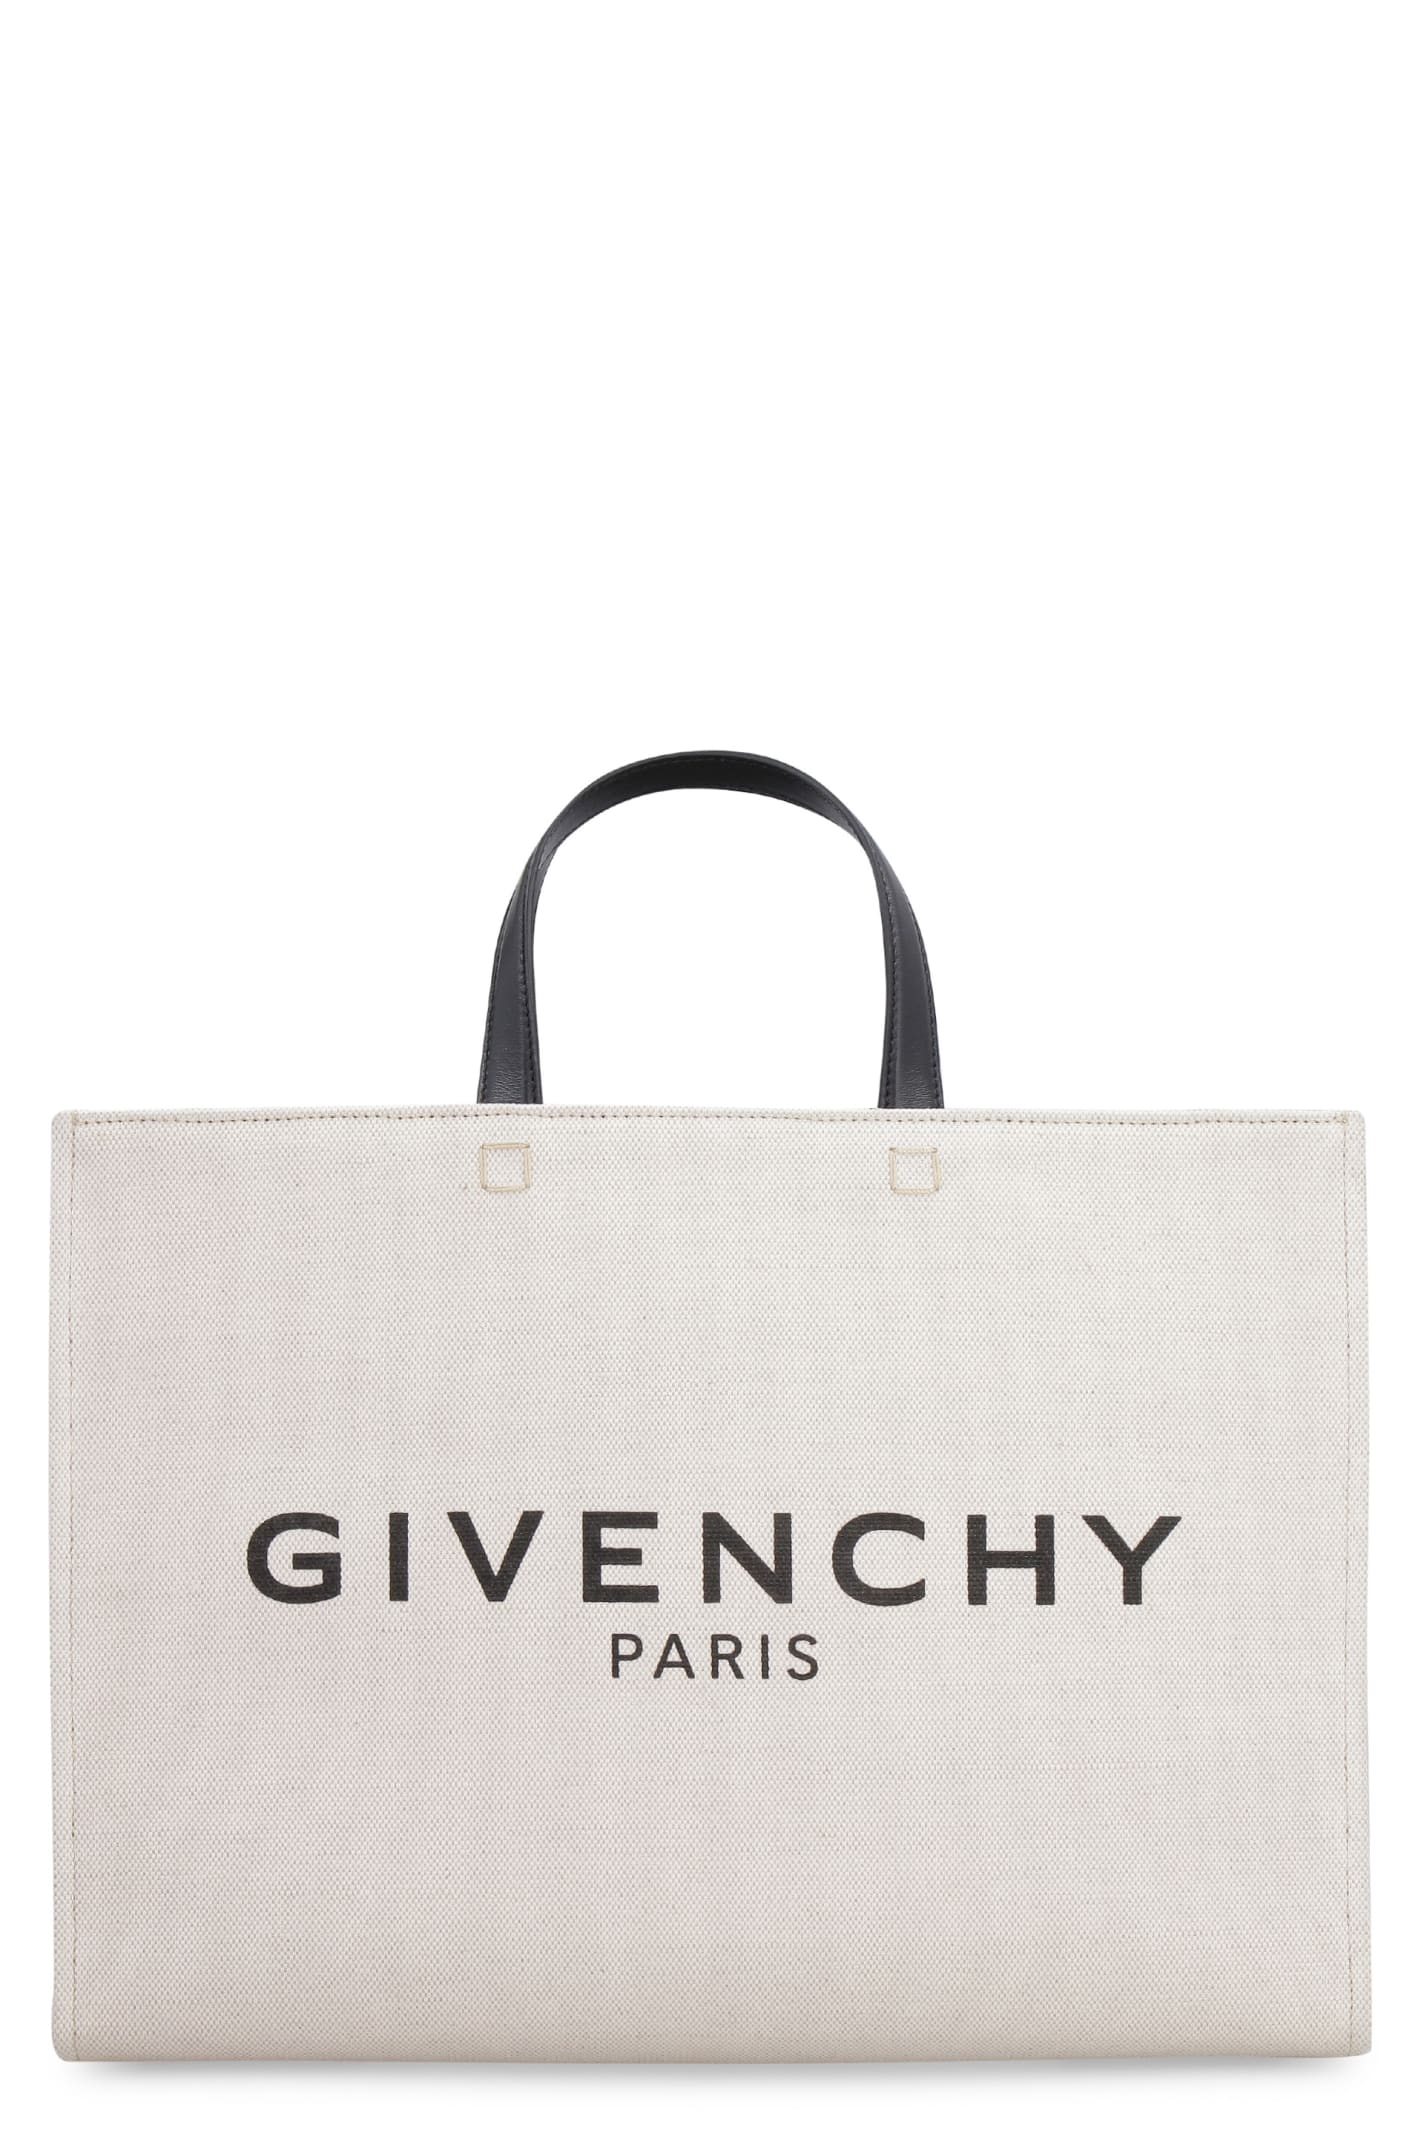 Givenchy G Canvas Tote Bag In Ecru